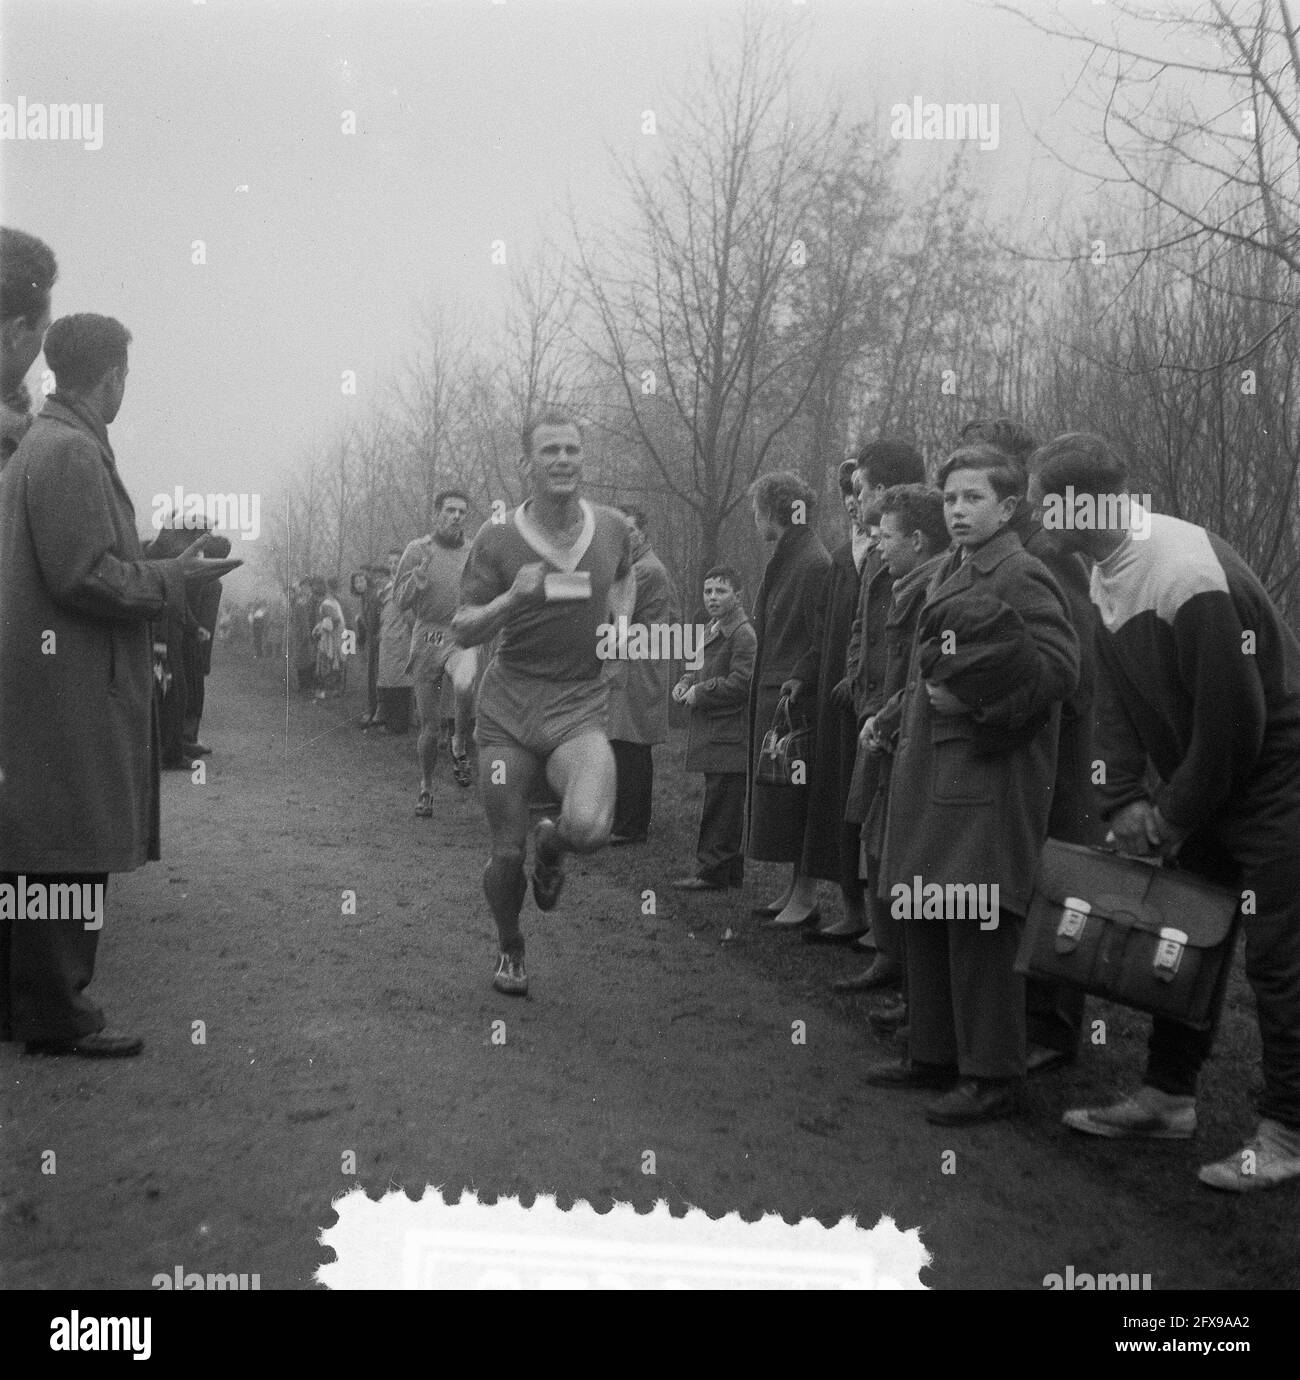 Bosloop Leiden. Runners on the road, February 3, 1957, The Netherlands, 20th century press agency photo, news to remember, documentary, historic photography 1945-1990, visual stories, human history of the Twentieth Century, capturing moments in time Stock Photo